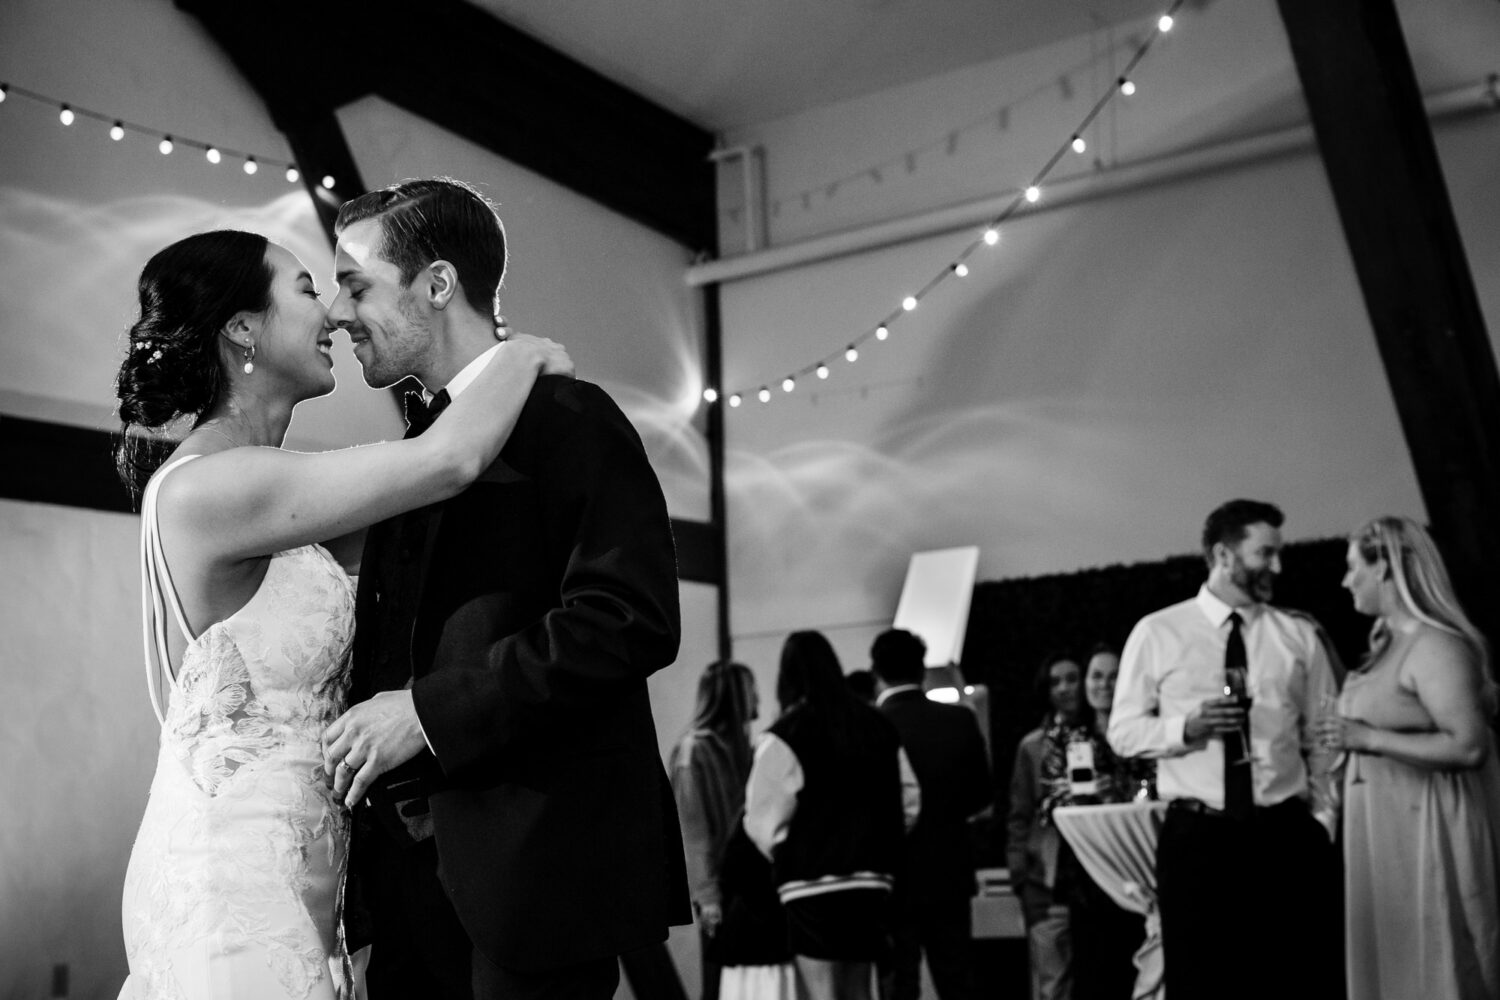 The bride and groom enjoy a romantic moment on the dance floor.